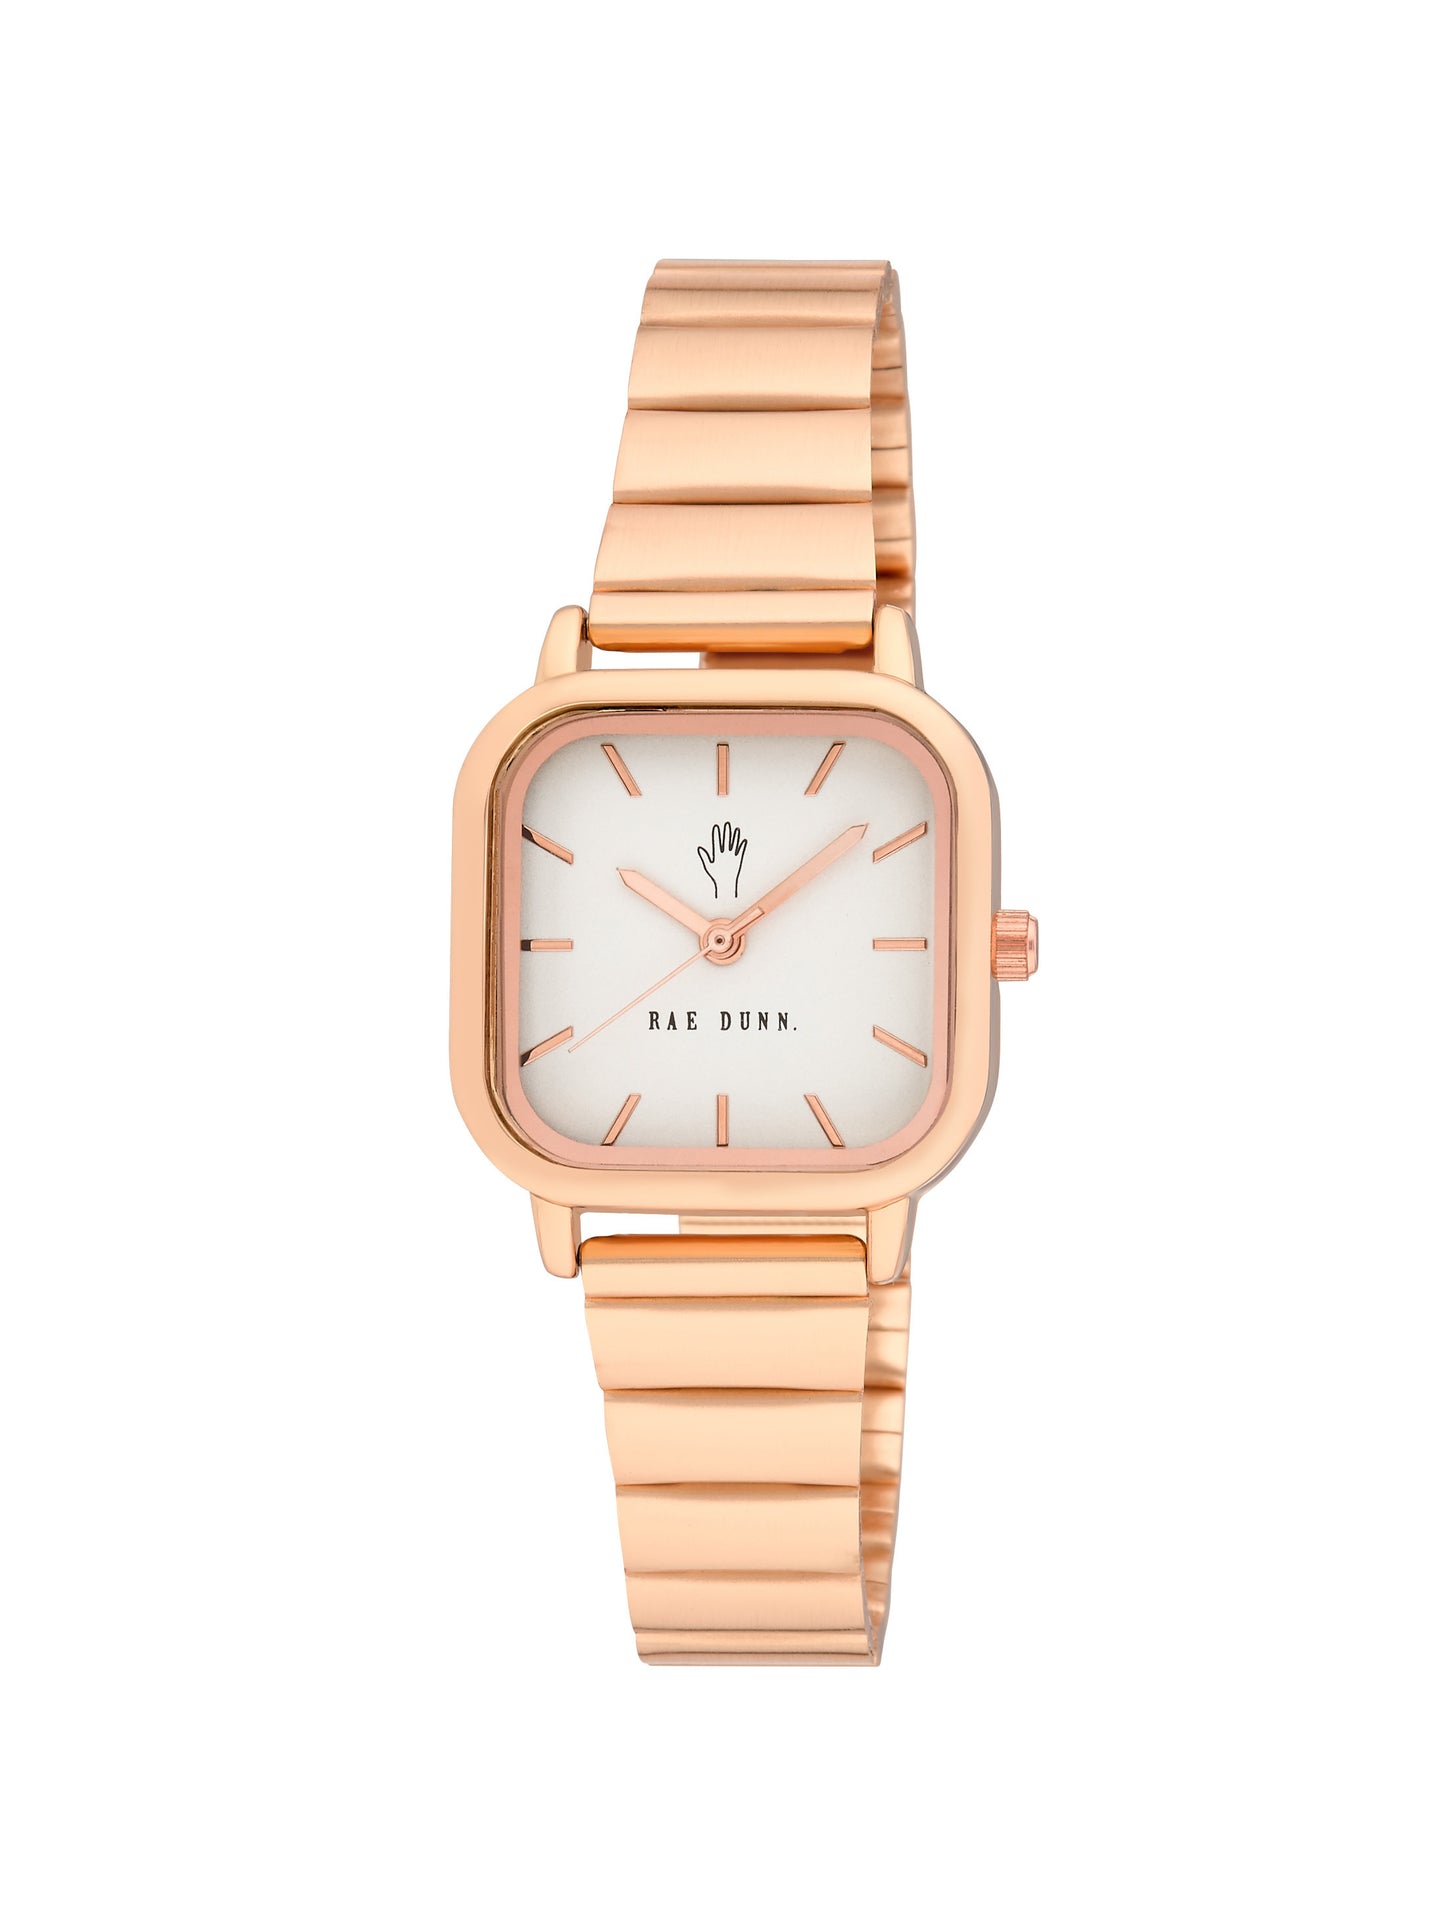 LUNA Square Face Gilded Bracelet Watch in Rose Gold, 26mm - Rae Dunn Wear - Watch